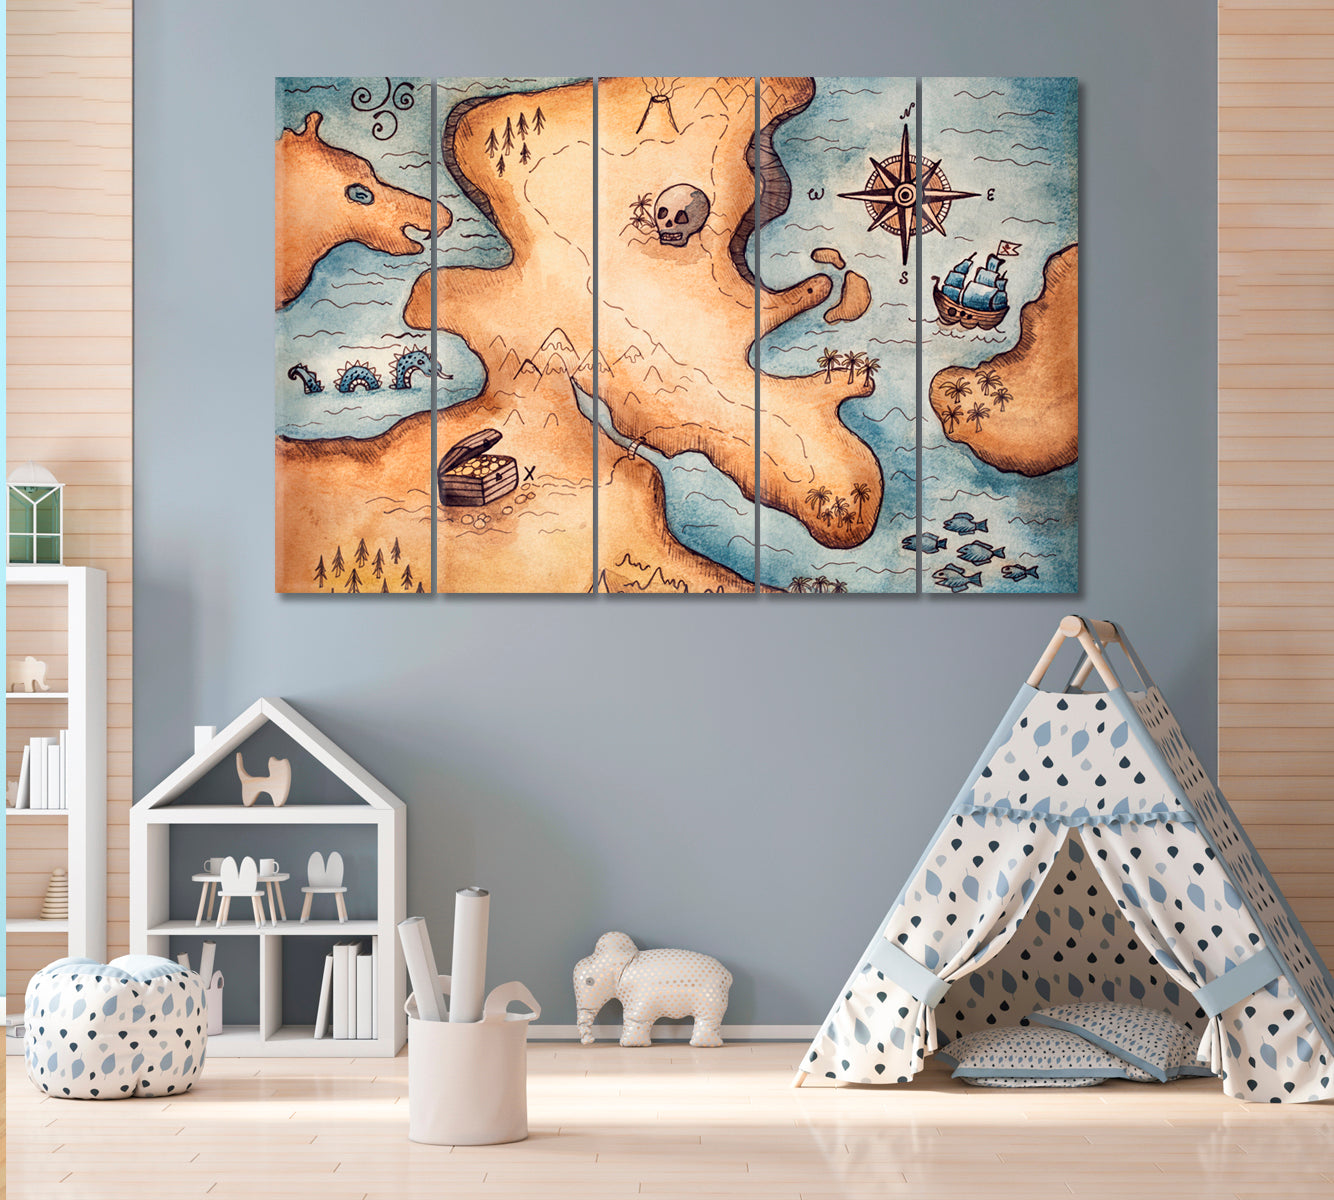 Pirate Map Canvas Print ArtLexy 5 Panels 36"x24" inches 